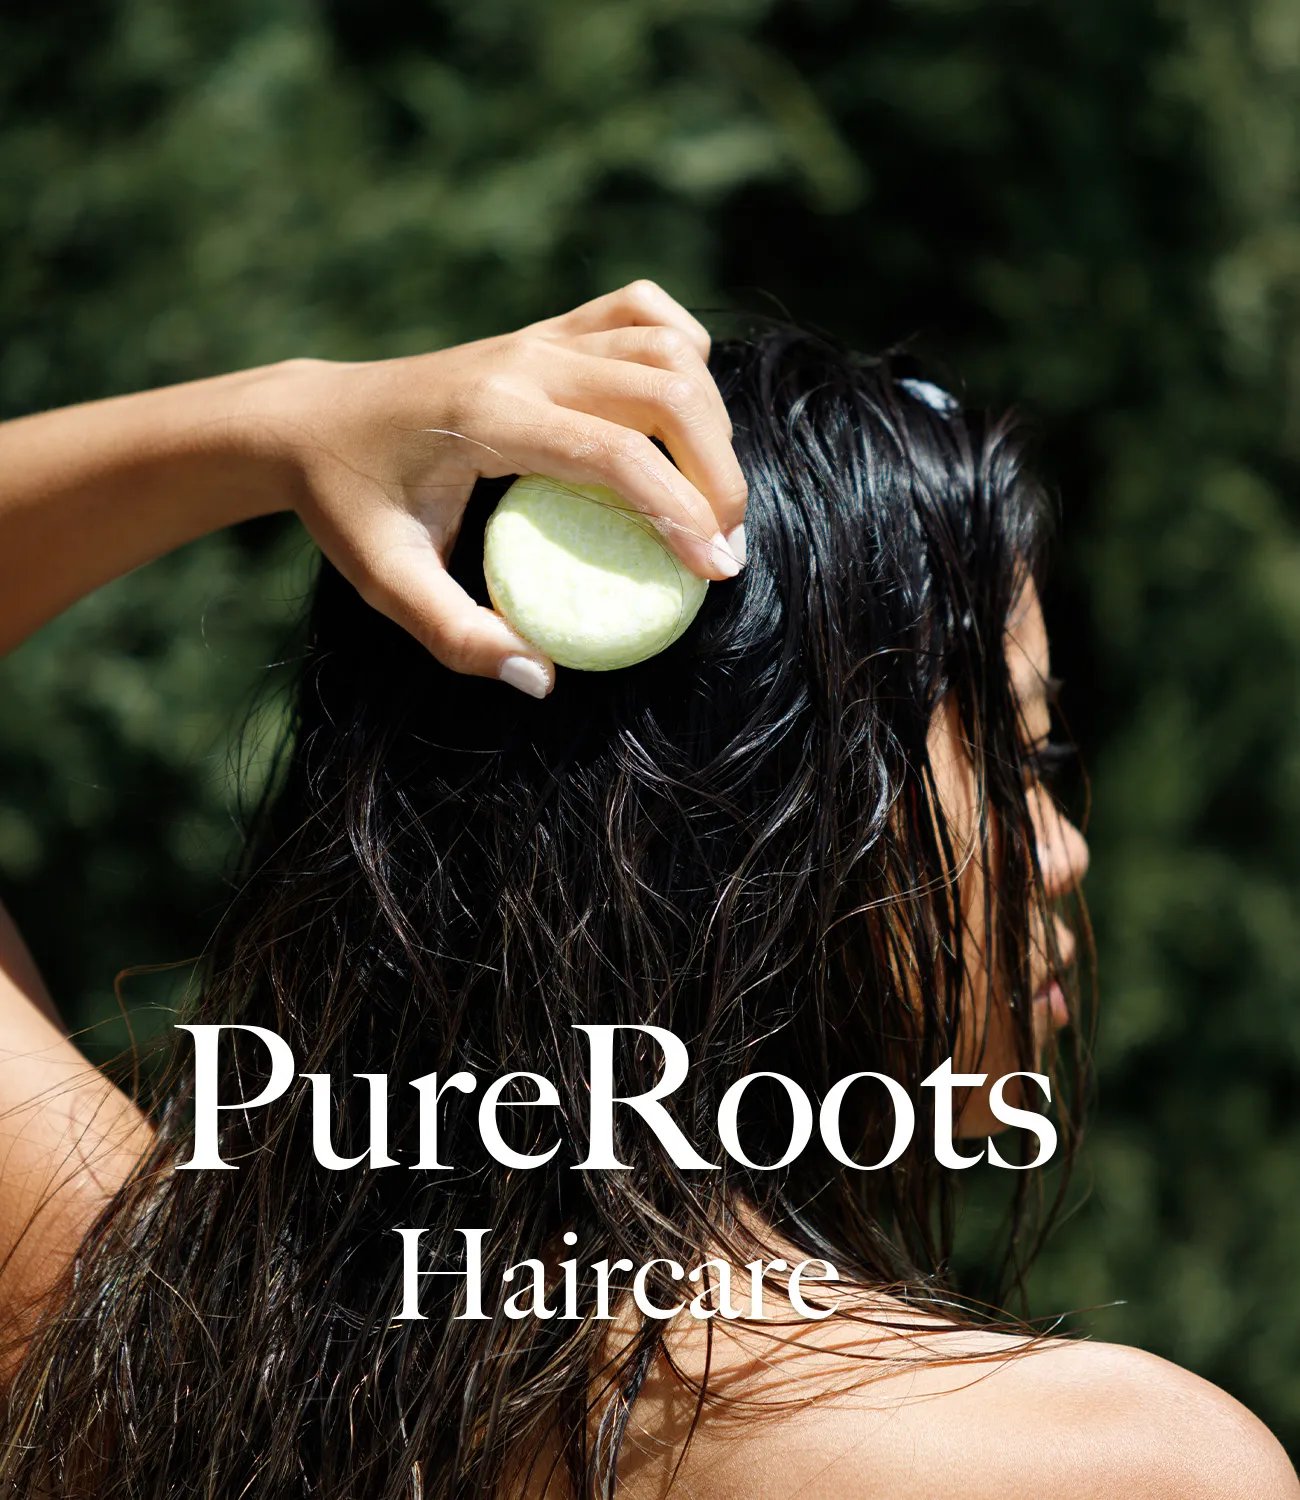 PureRoots Hair care